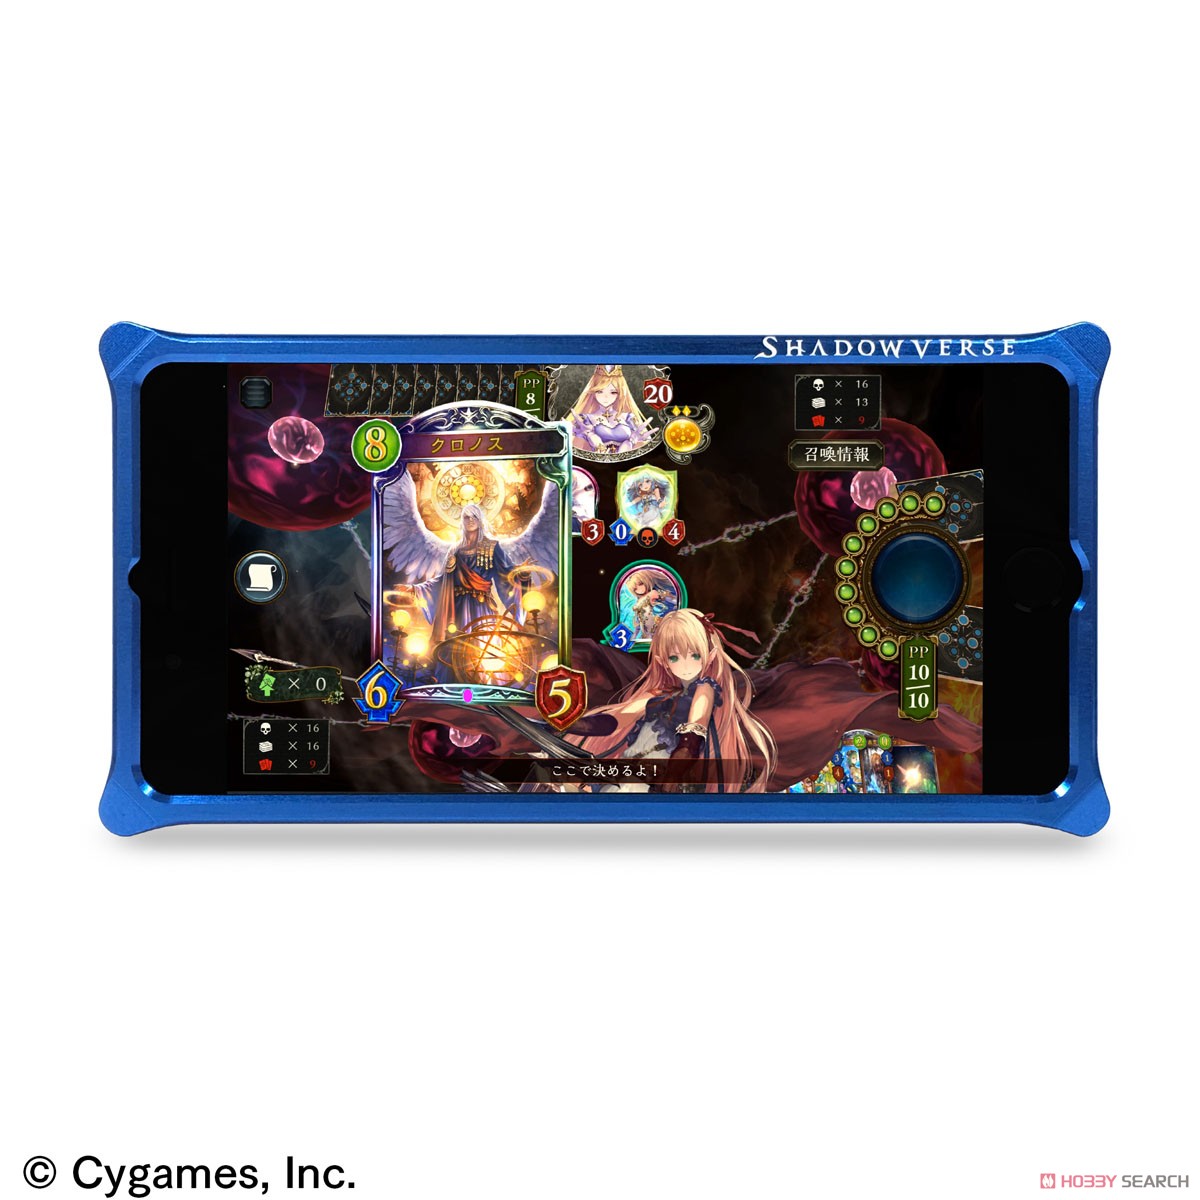 Shadowverse ソリッドバンパー Shadowverse for iPhone 8 Plus/7 Plus Blue (キャラクターグッズ) その他の画像1